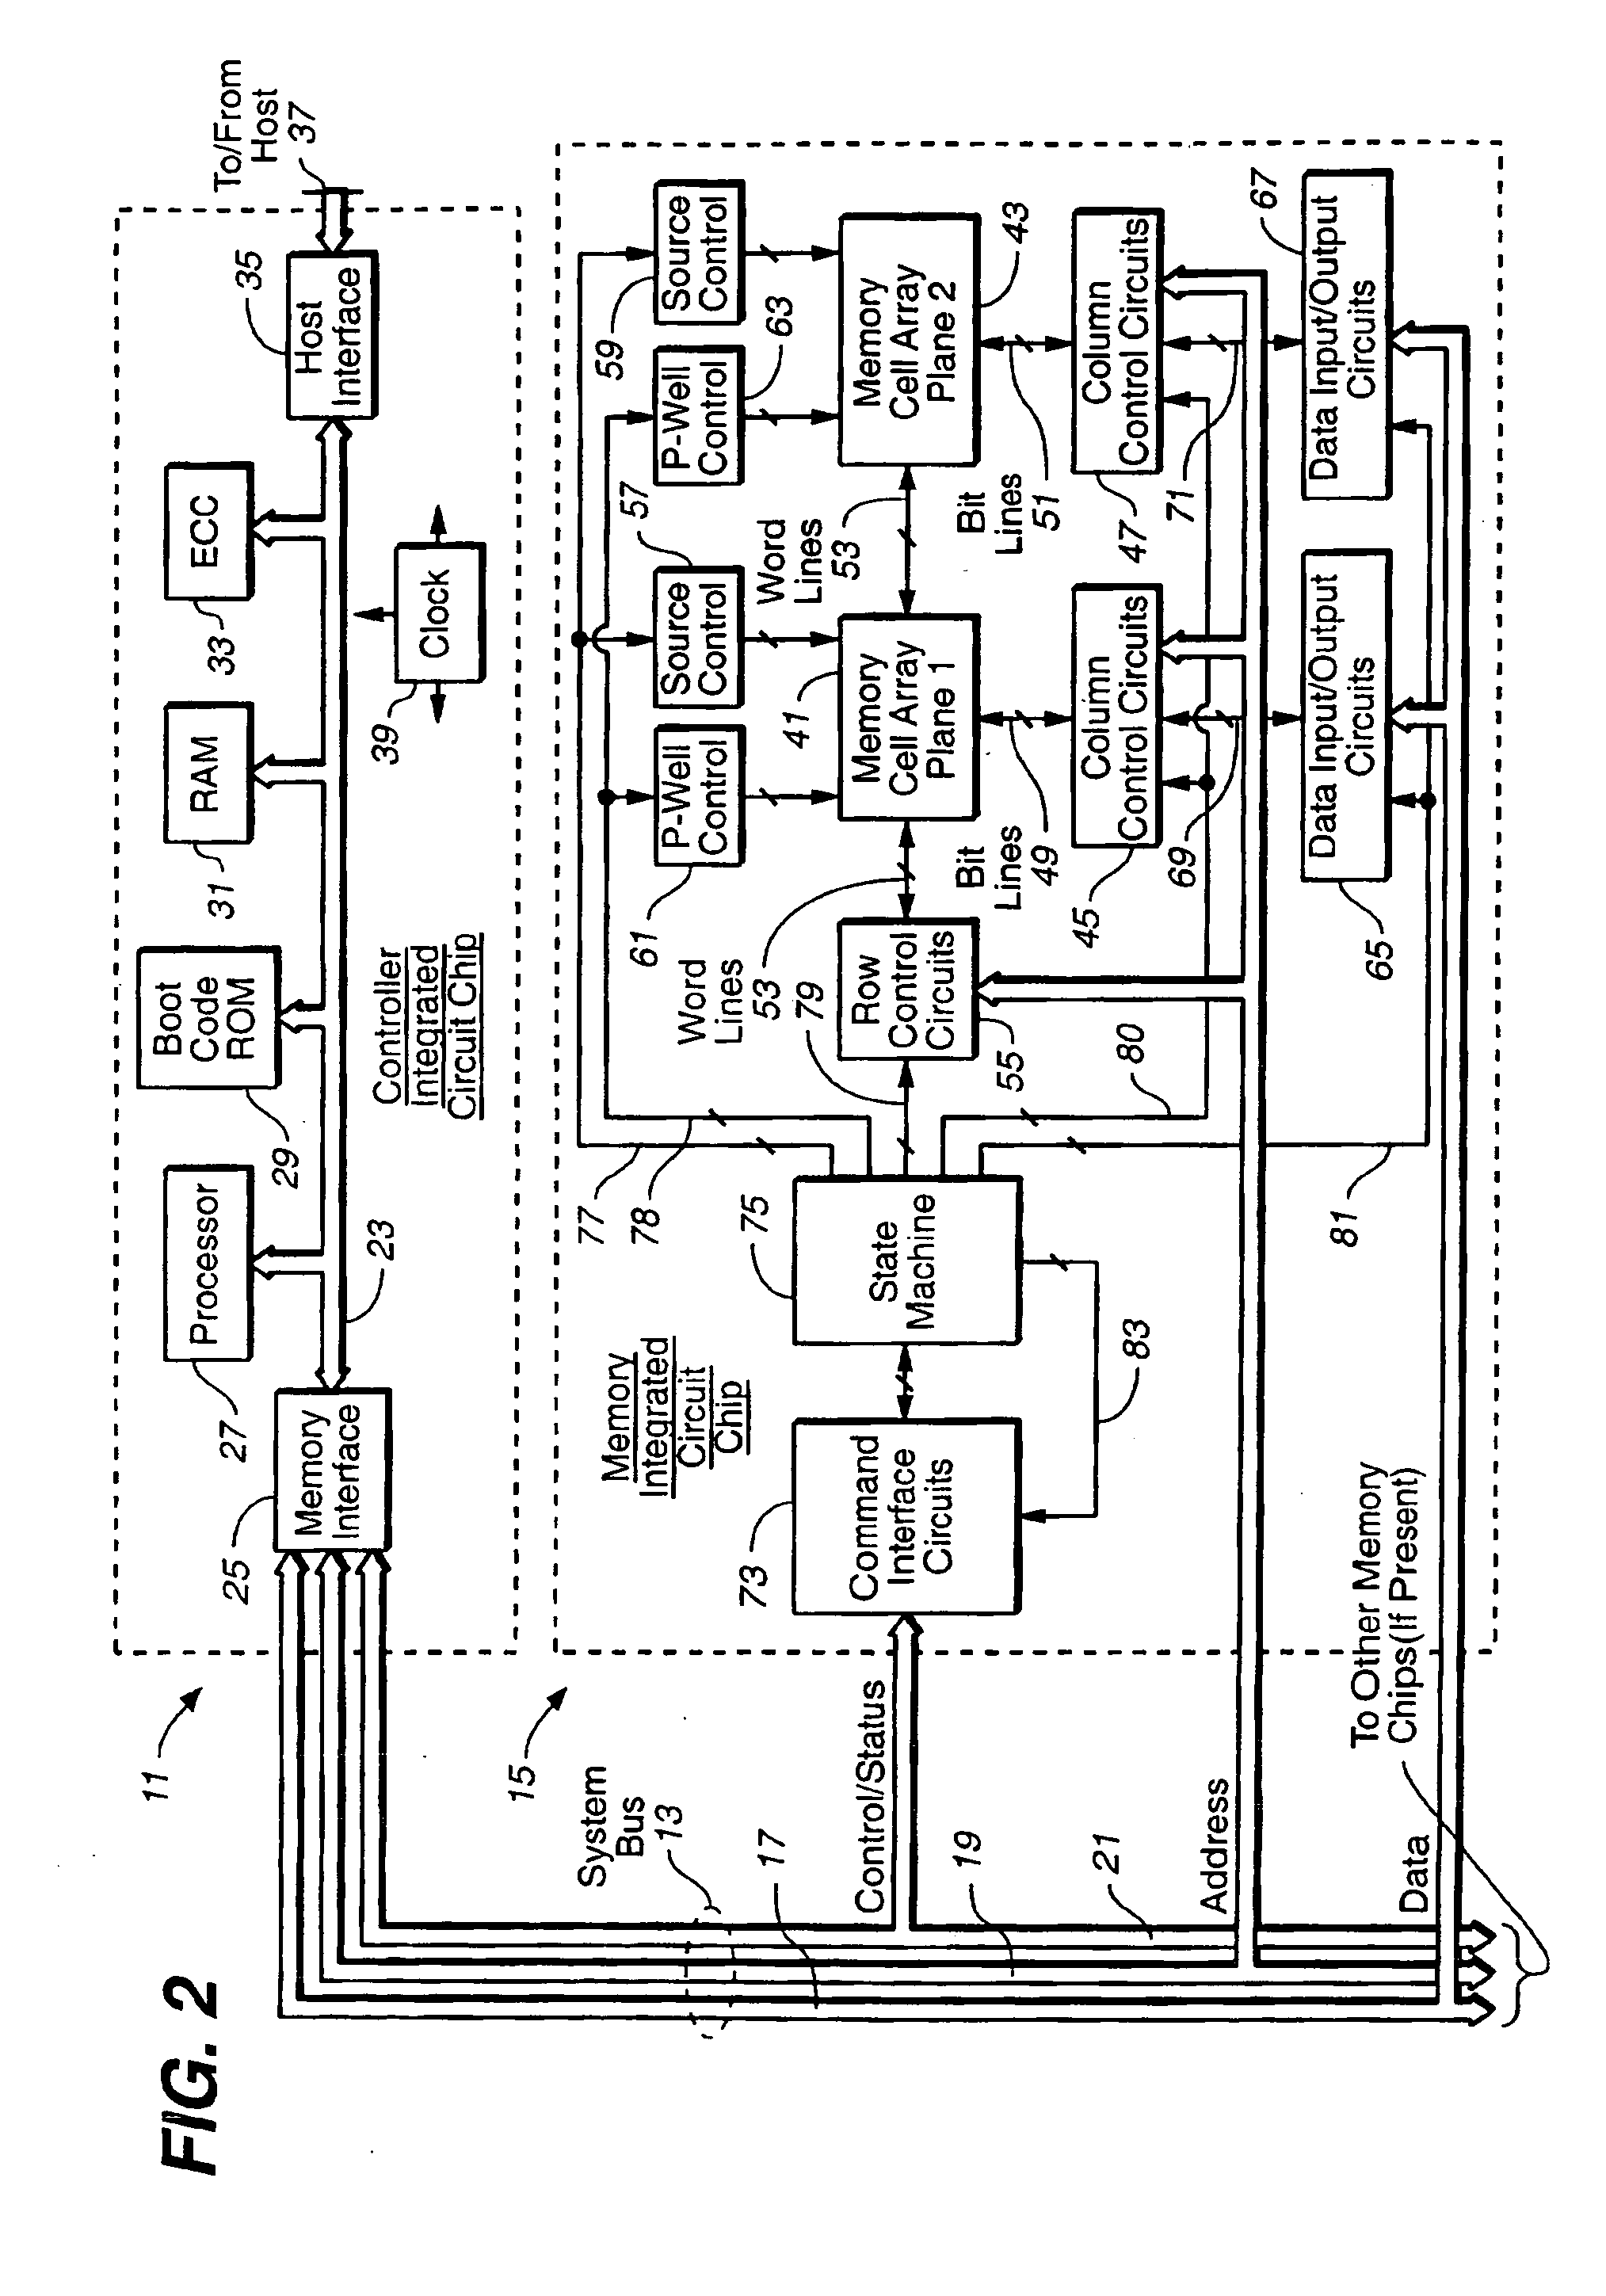 Non-volatile memories with data alignment in a directly mapped file storage system